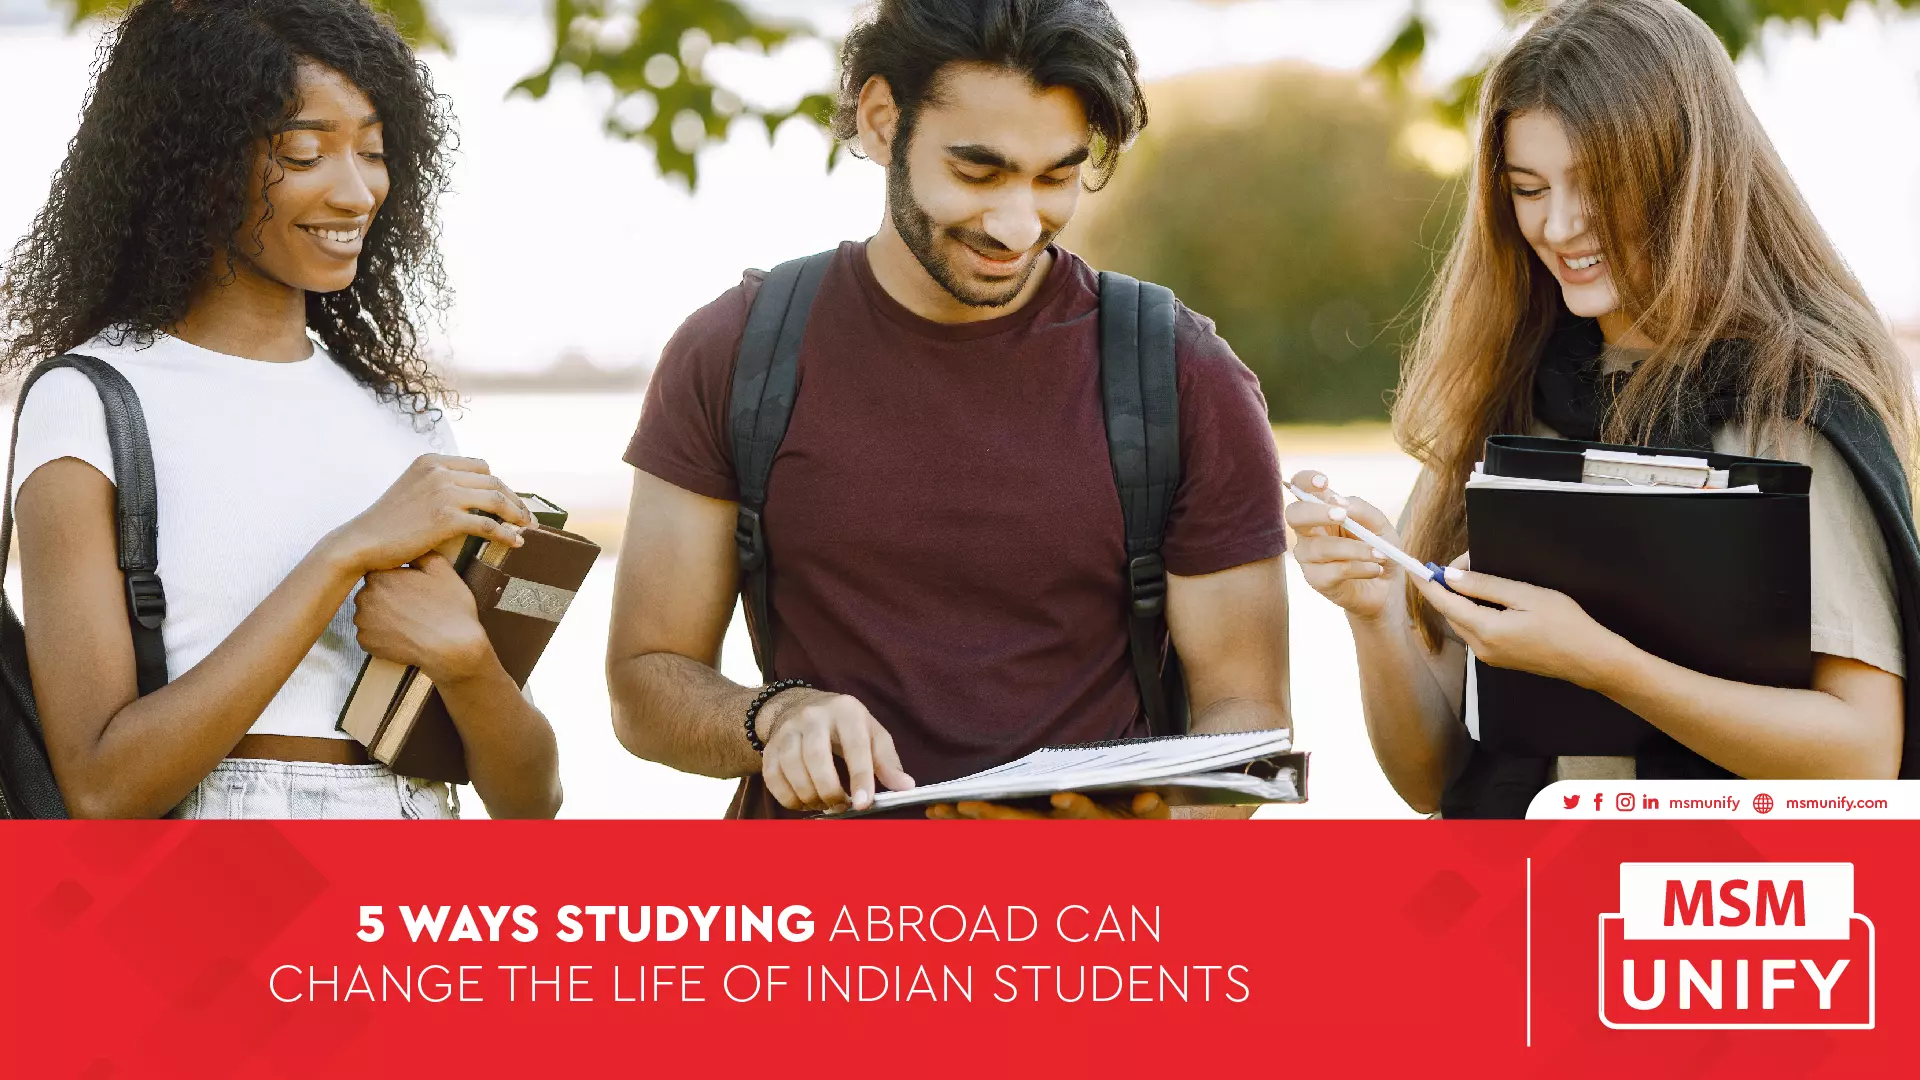 111422 MSM Unify 5 Ways Studying Abroad Can Change the Life of Indian Students 01